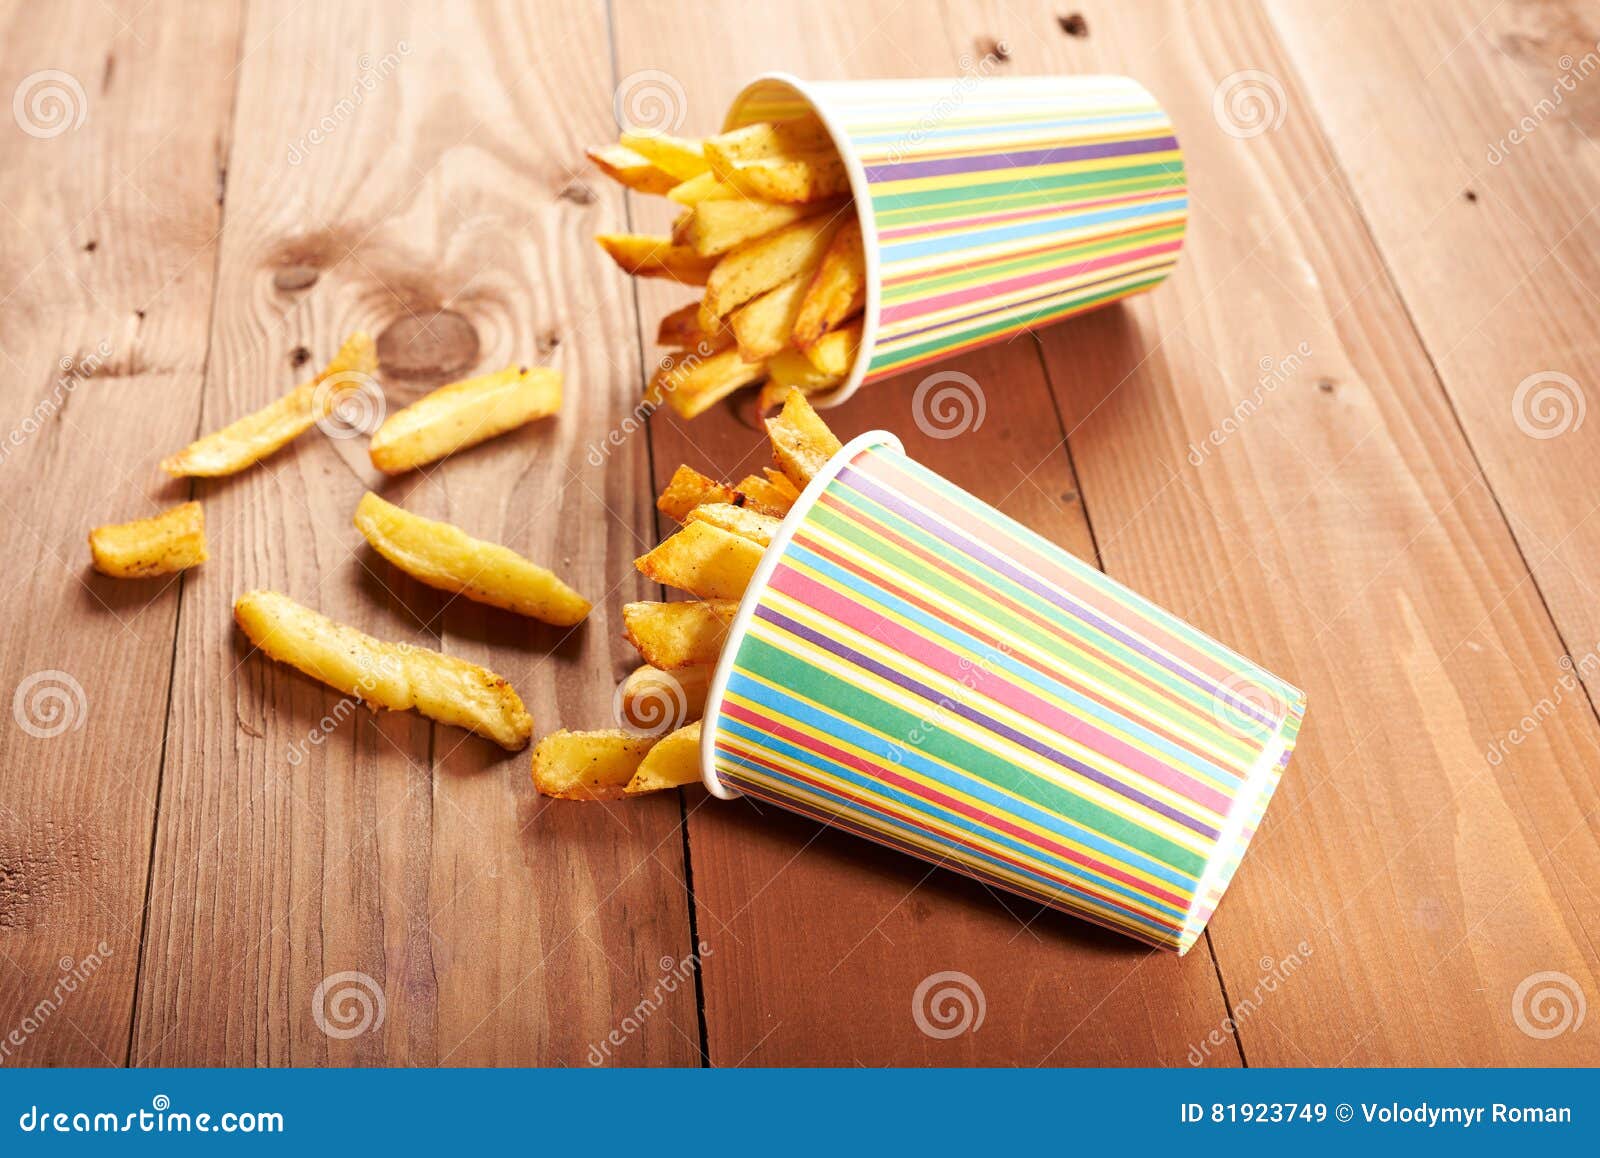 Fried French Fries Close Up In Paper Cup Stock Image ...